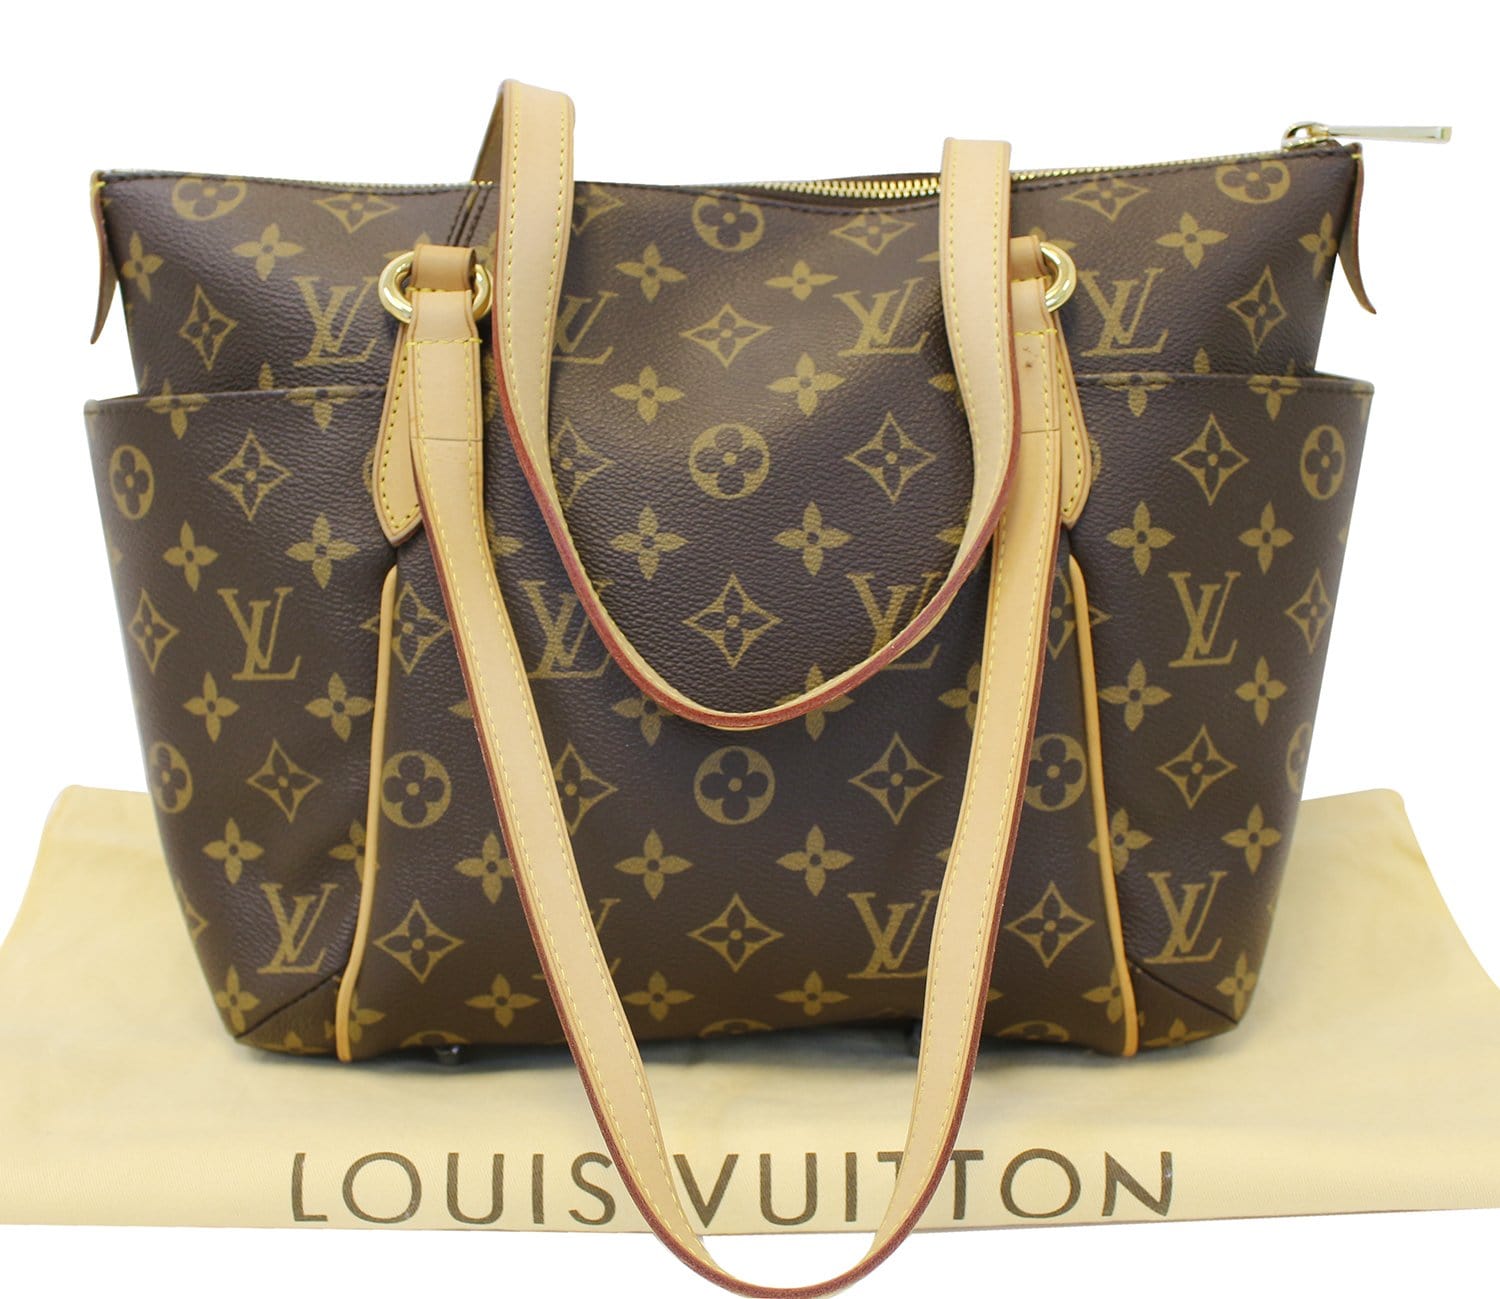 Louis Vuitton 2014 pre-owned Totally PM tote bag - ShopStyle